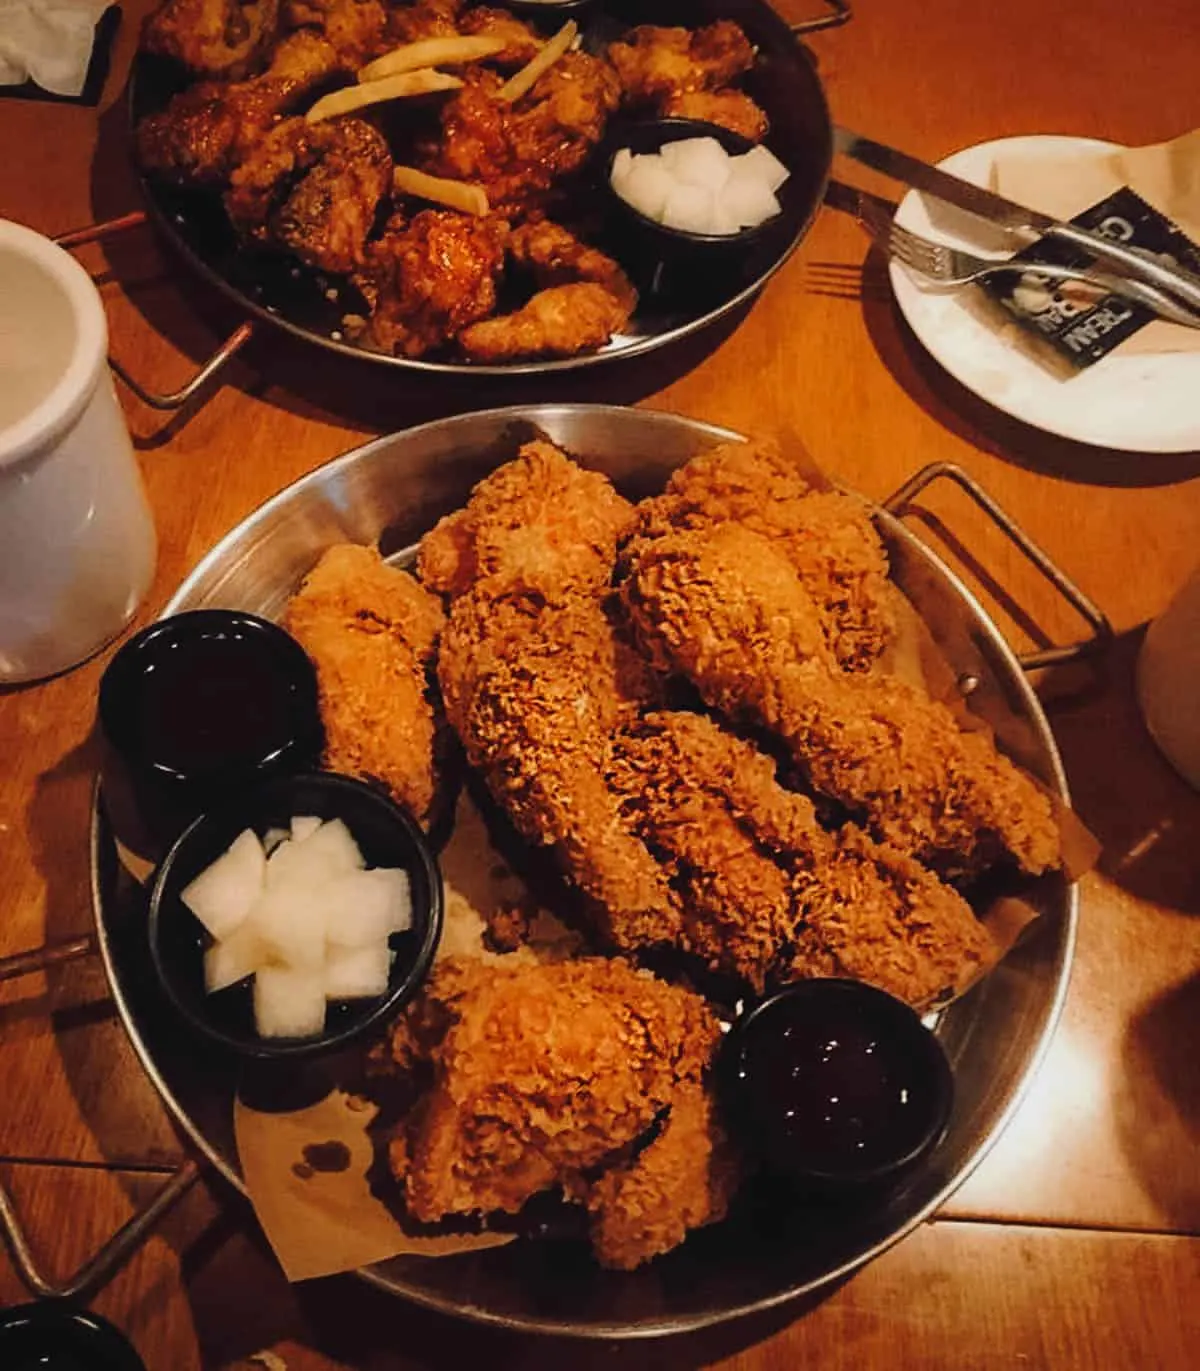 Fried chicken at BBQ Olive Chicken Cafe in Seoul, South Korea